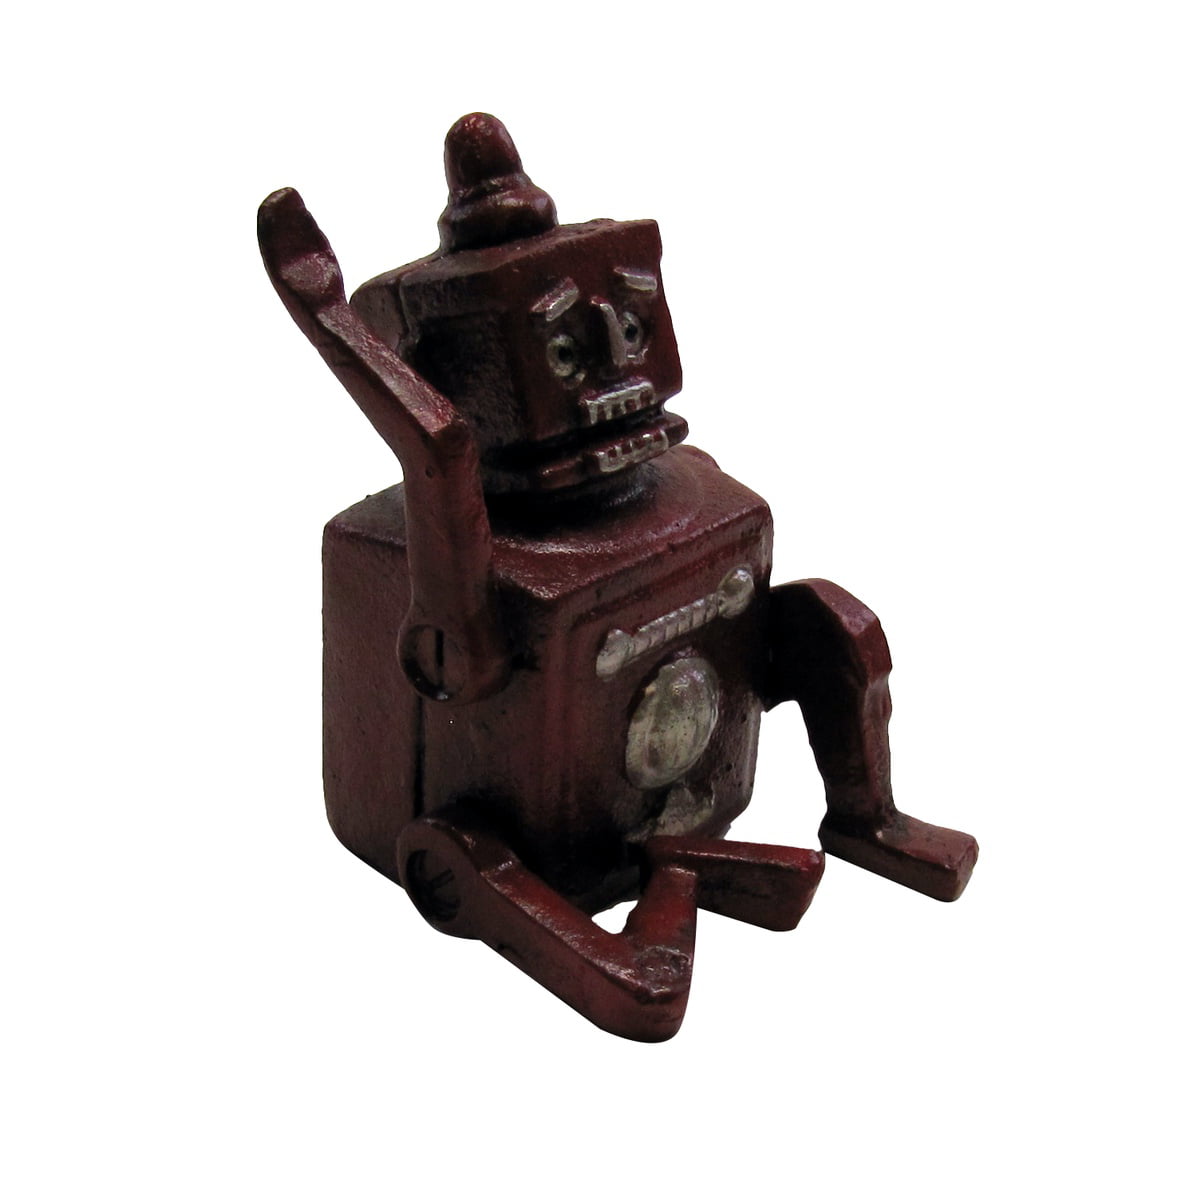 Antique Vintage Style Mini Cast Iron Red Robert the Robot Toy Paperweight 